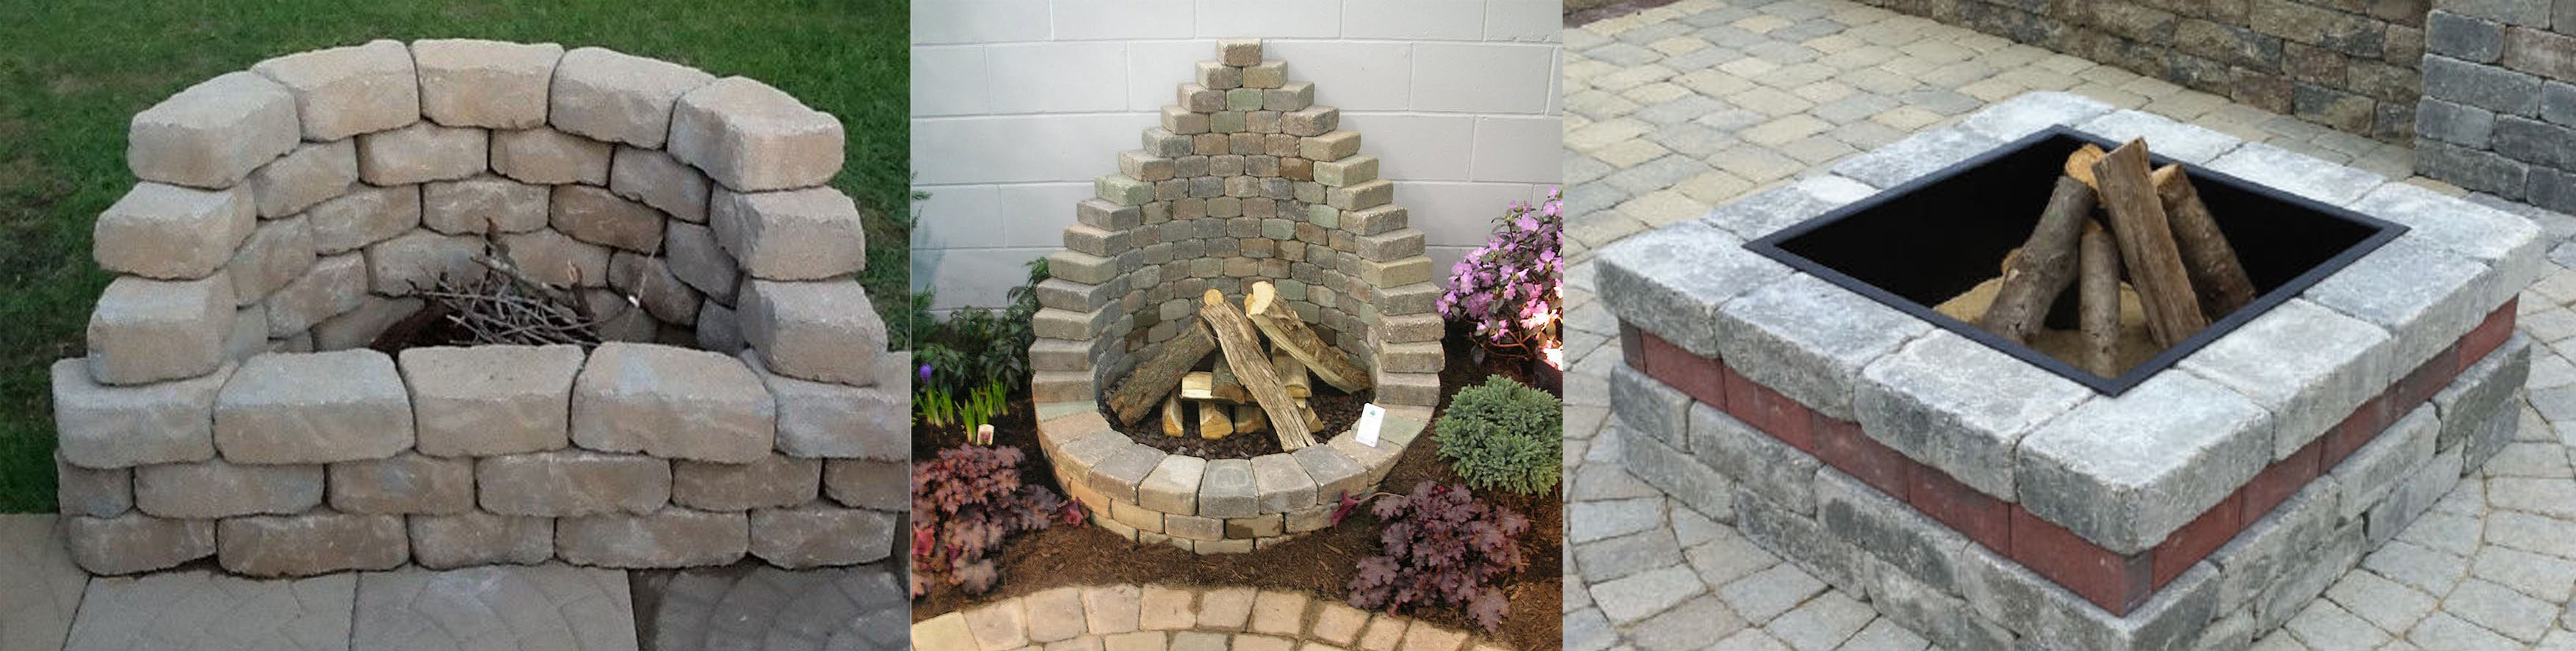 Easy fire pit designs that you can choose for modern patio outdoor fire pit set with custom fire pits set and backyard fire pit ideas